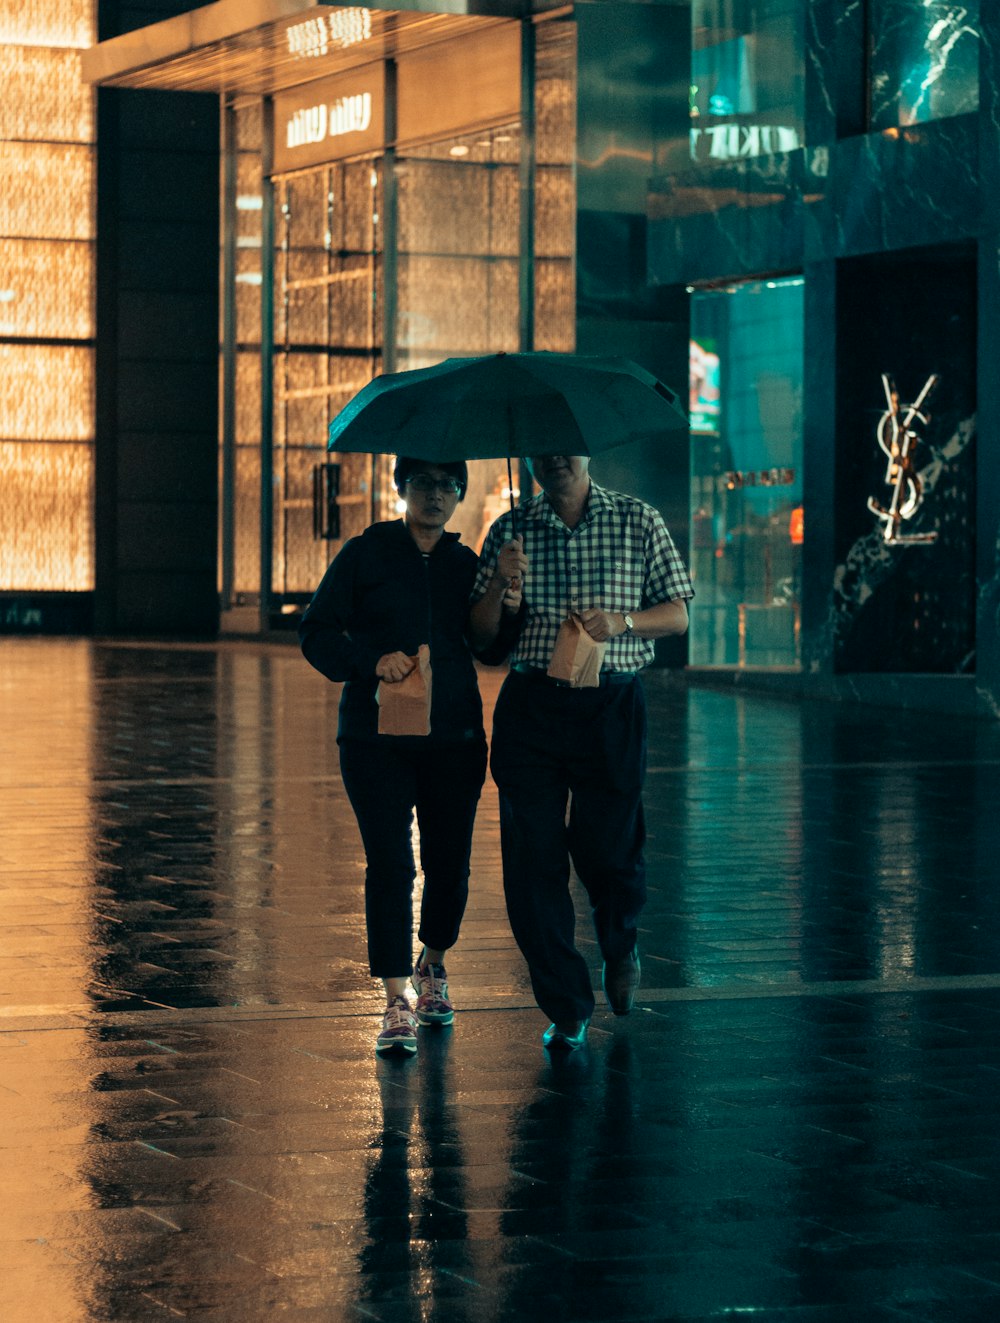 man and woman under same umbrella walking while holding paper bags